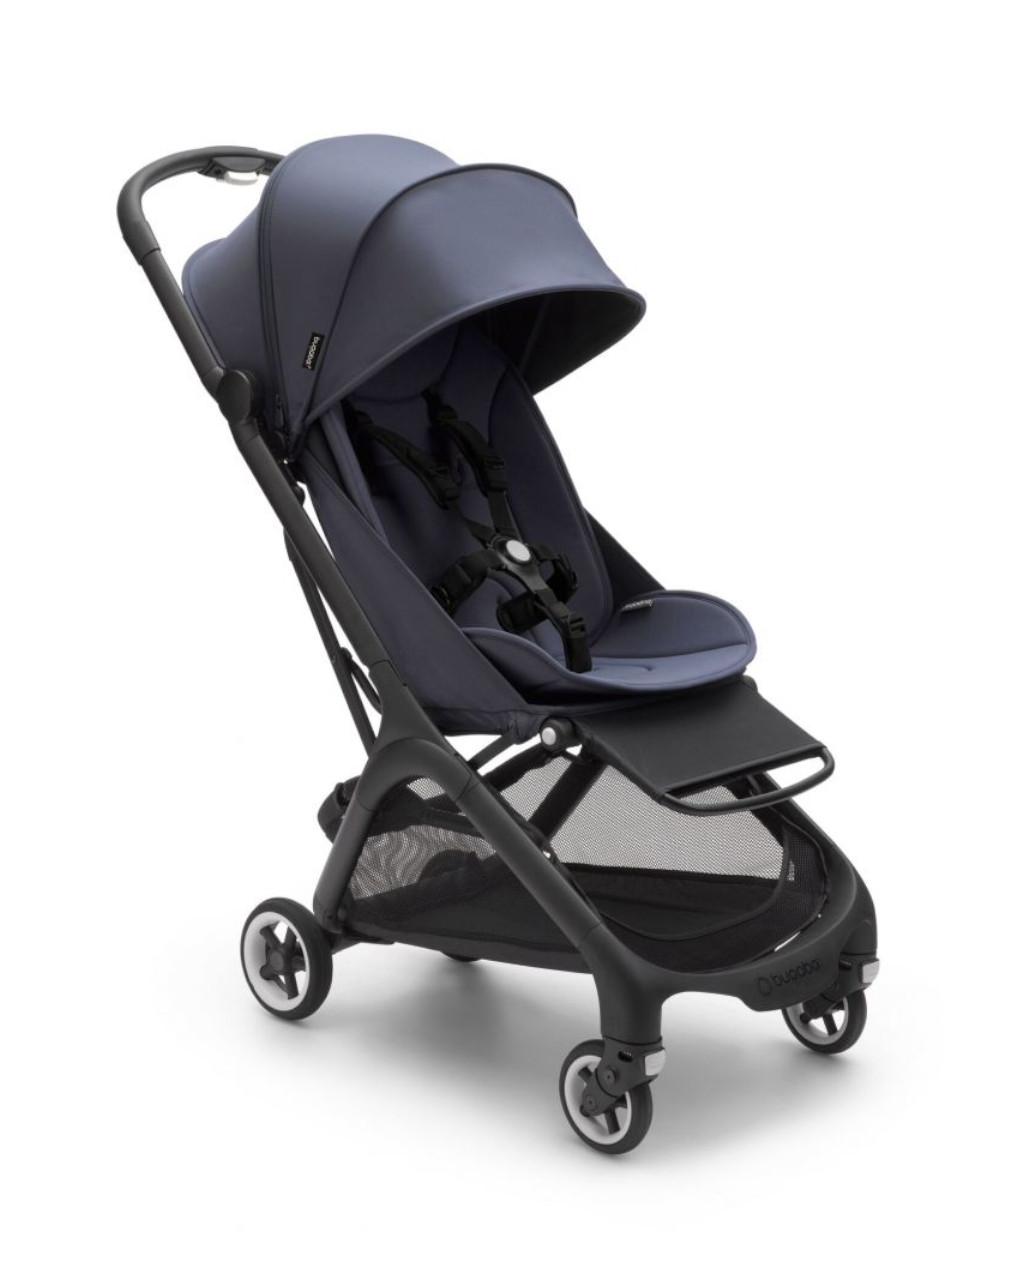 Bugaboo butterfly black/stormy blue - Bugaboo